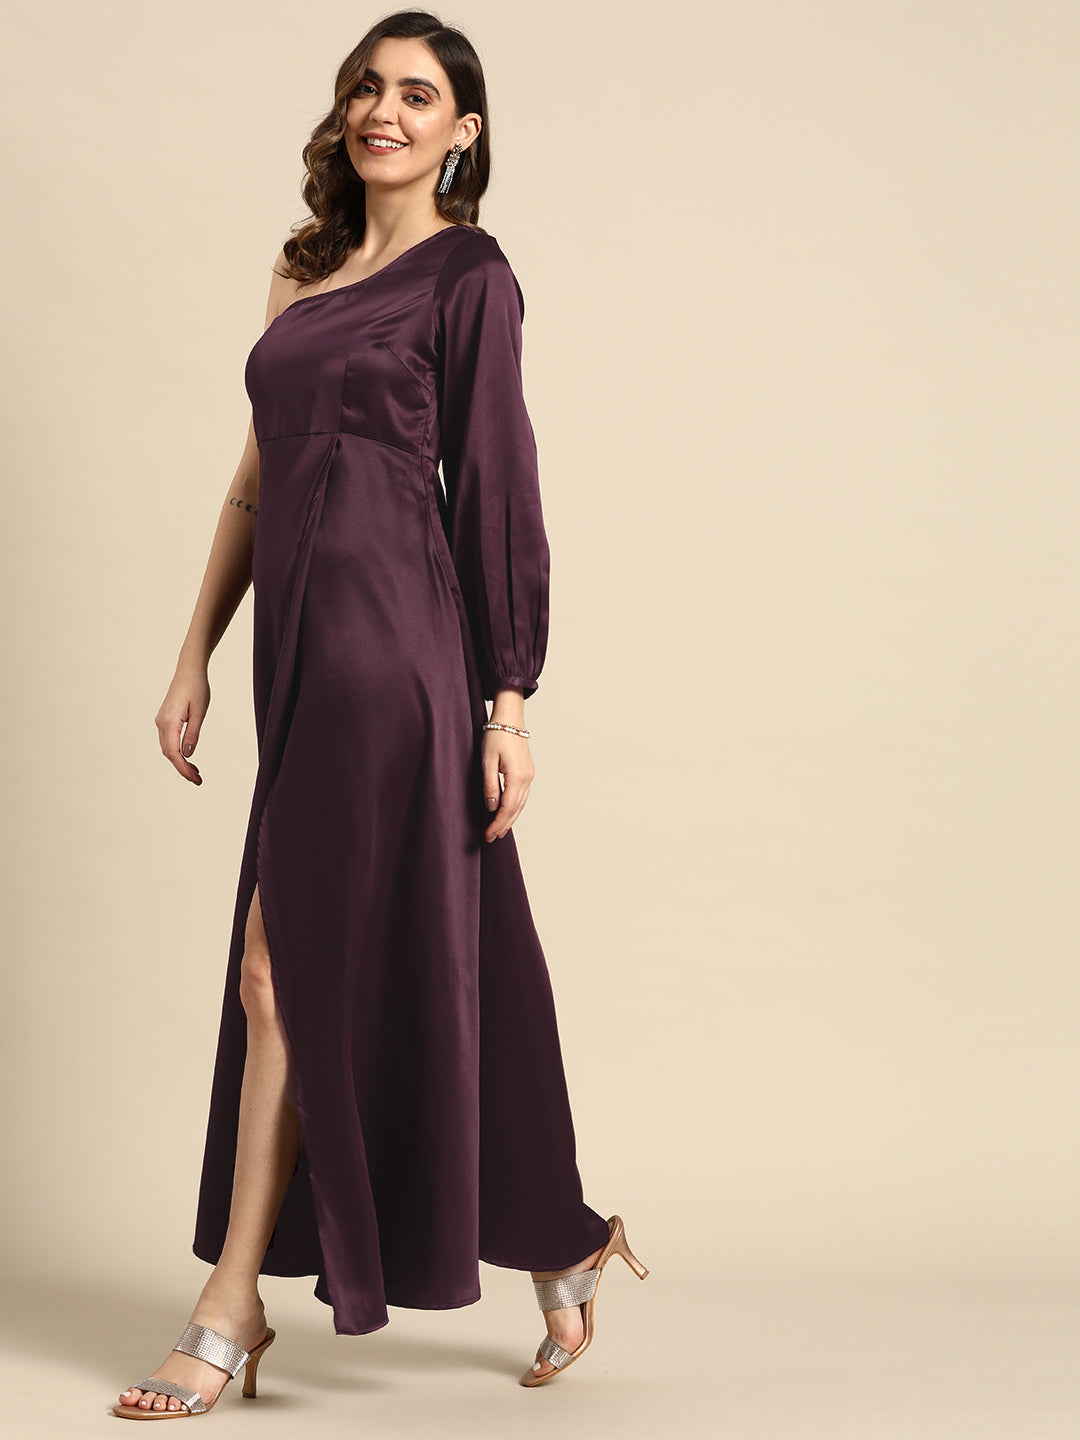 One shoulder Over lap Maxi Dress in Purple